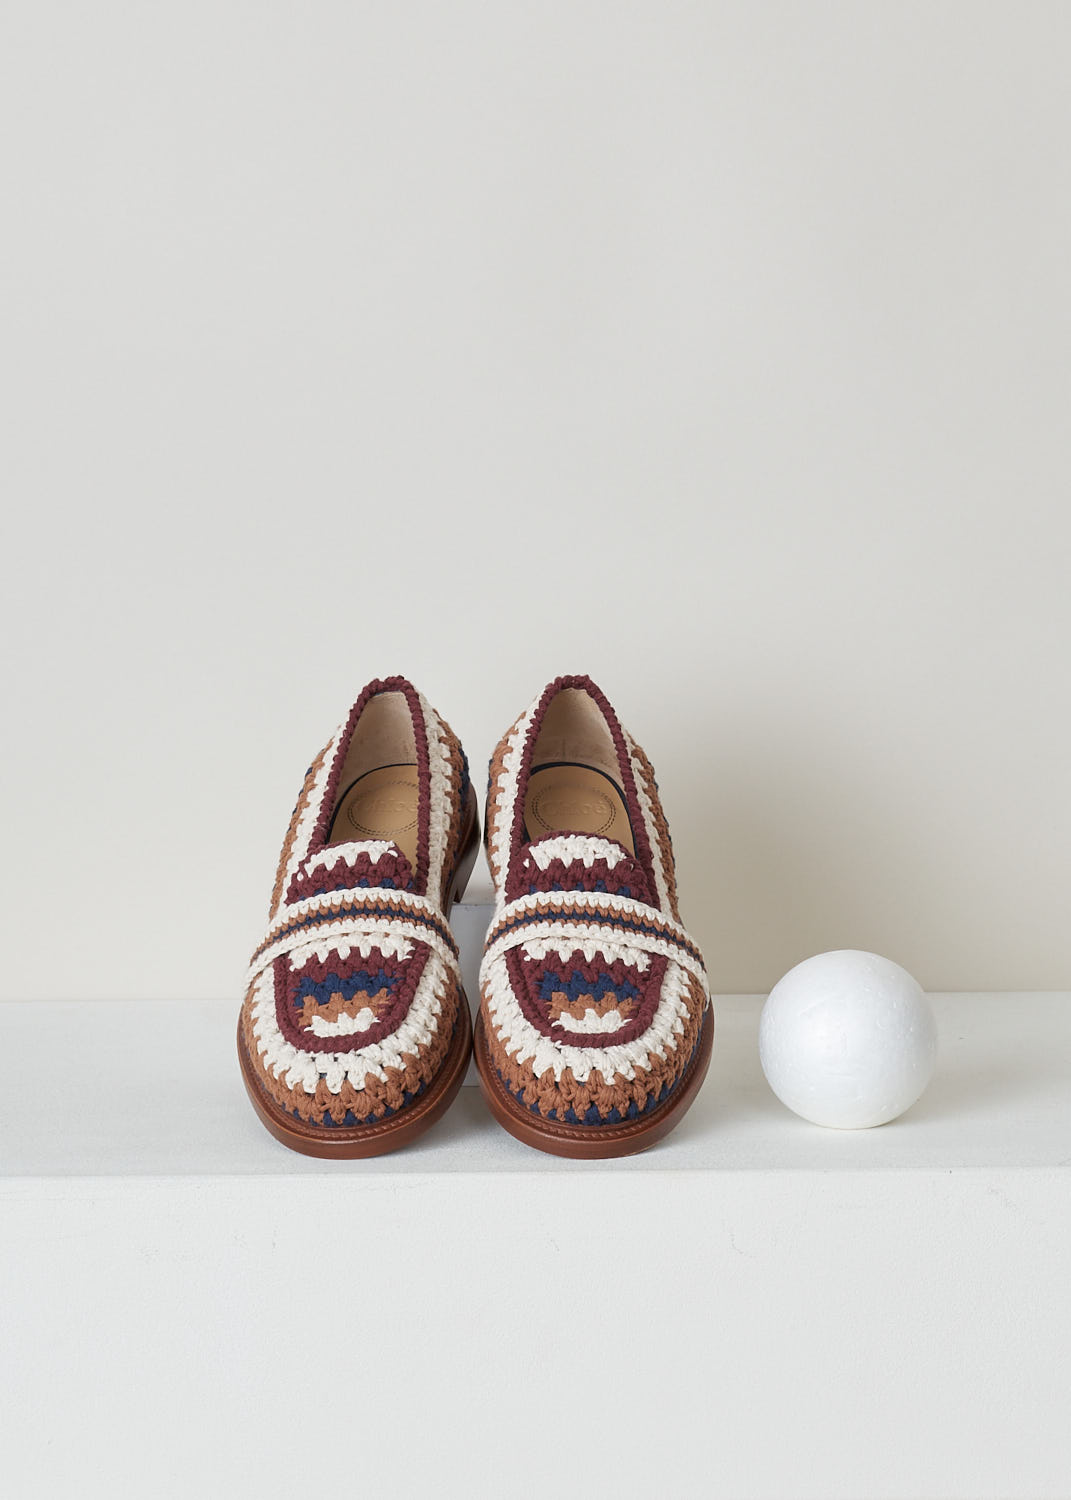 CHLOÃ‰, CROCHET MULTICOLOR LOAFERS, CHC22S584X04ZA_KALYA_FLAT_LOA_4ZA_MULTICOLOR_BLUE, Print, Top, These multicolored crochet loafers have a slip-on style with a round toe. The shoes have a sleek brown sole.
